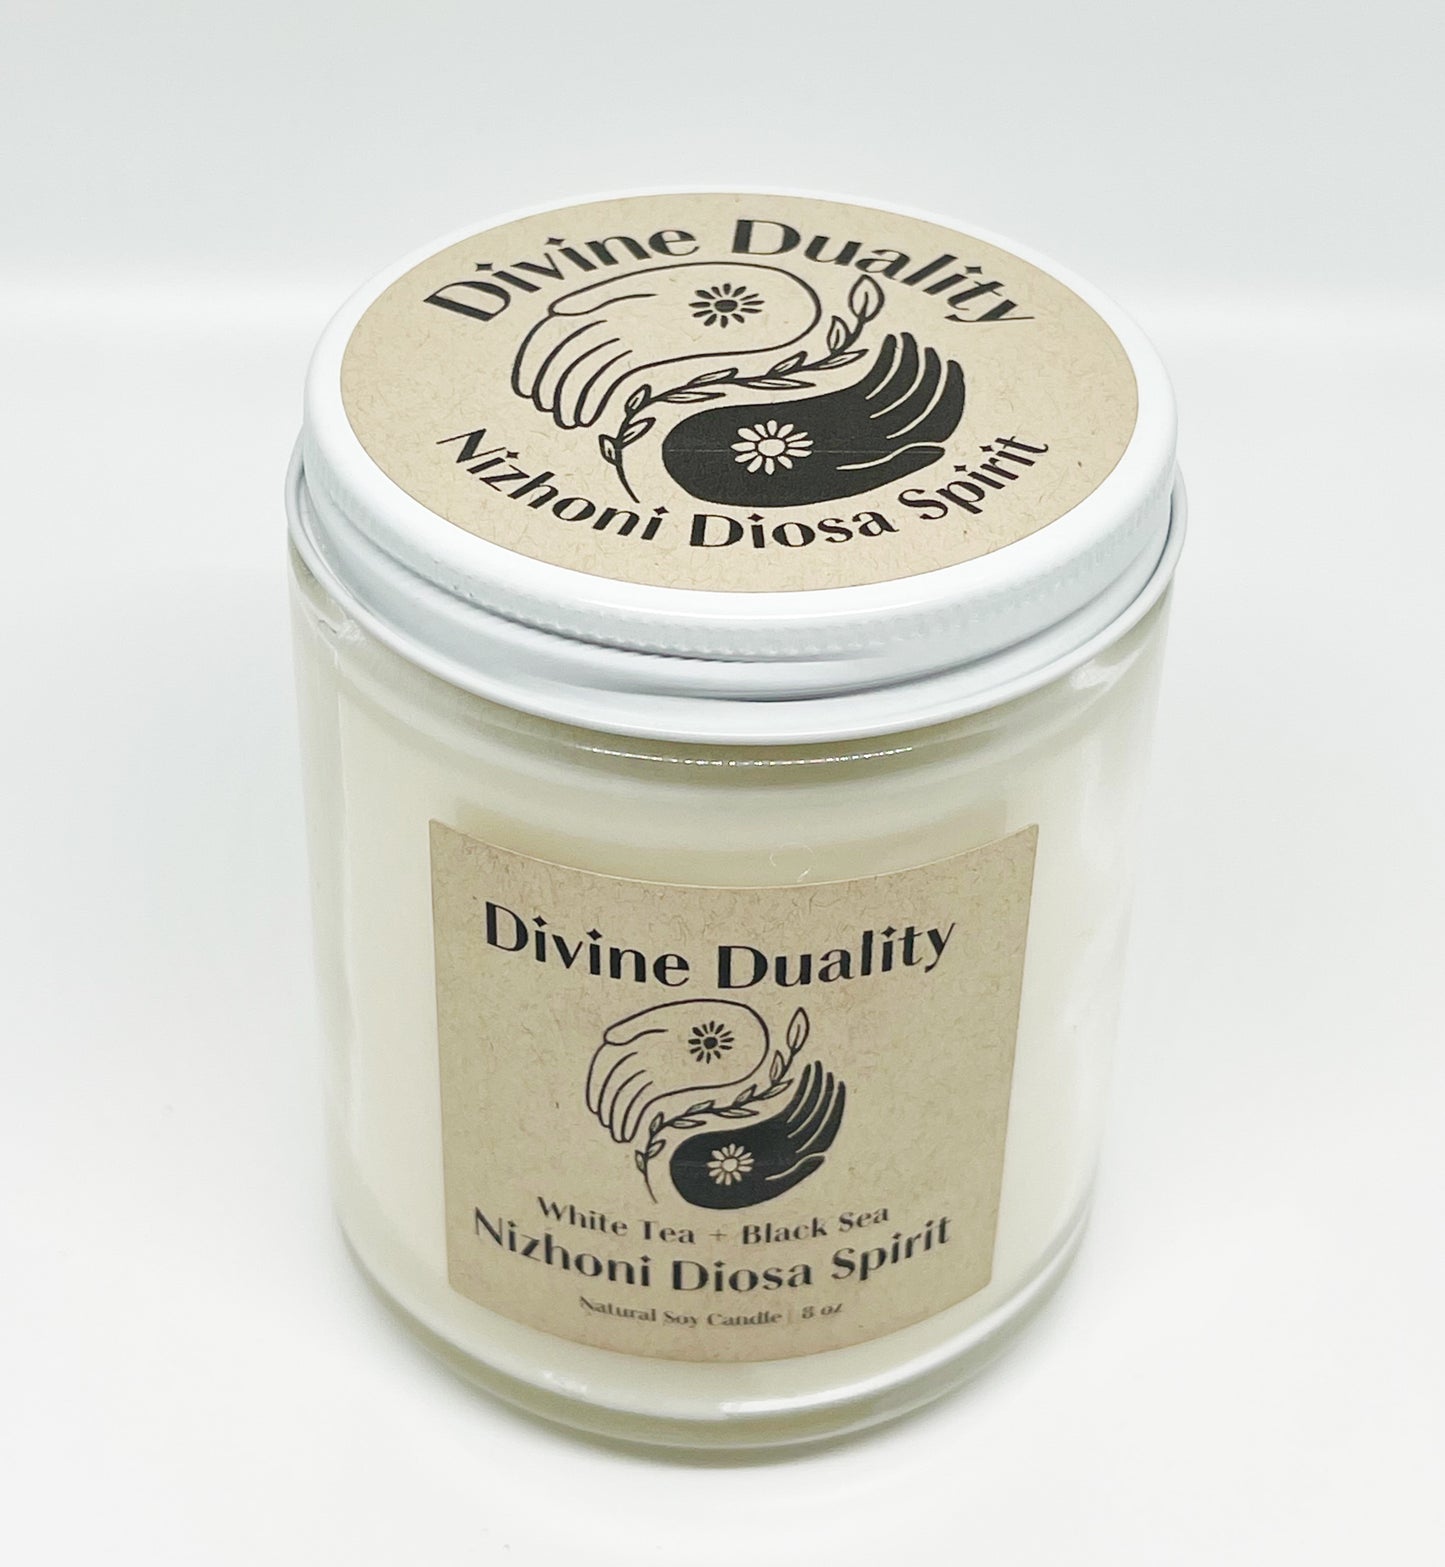 Divine Duality Candle